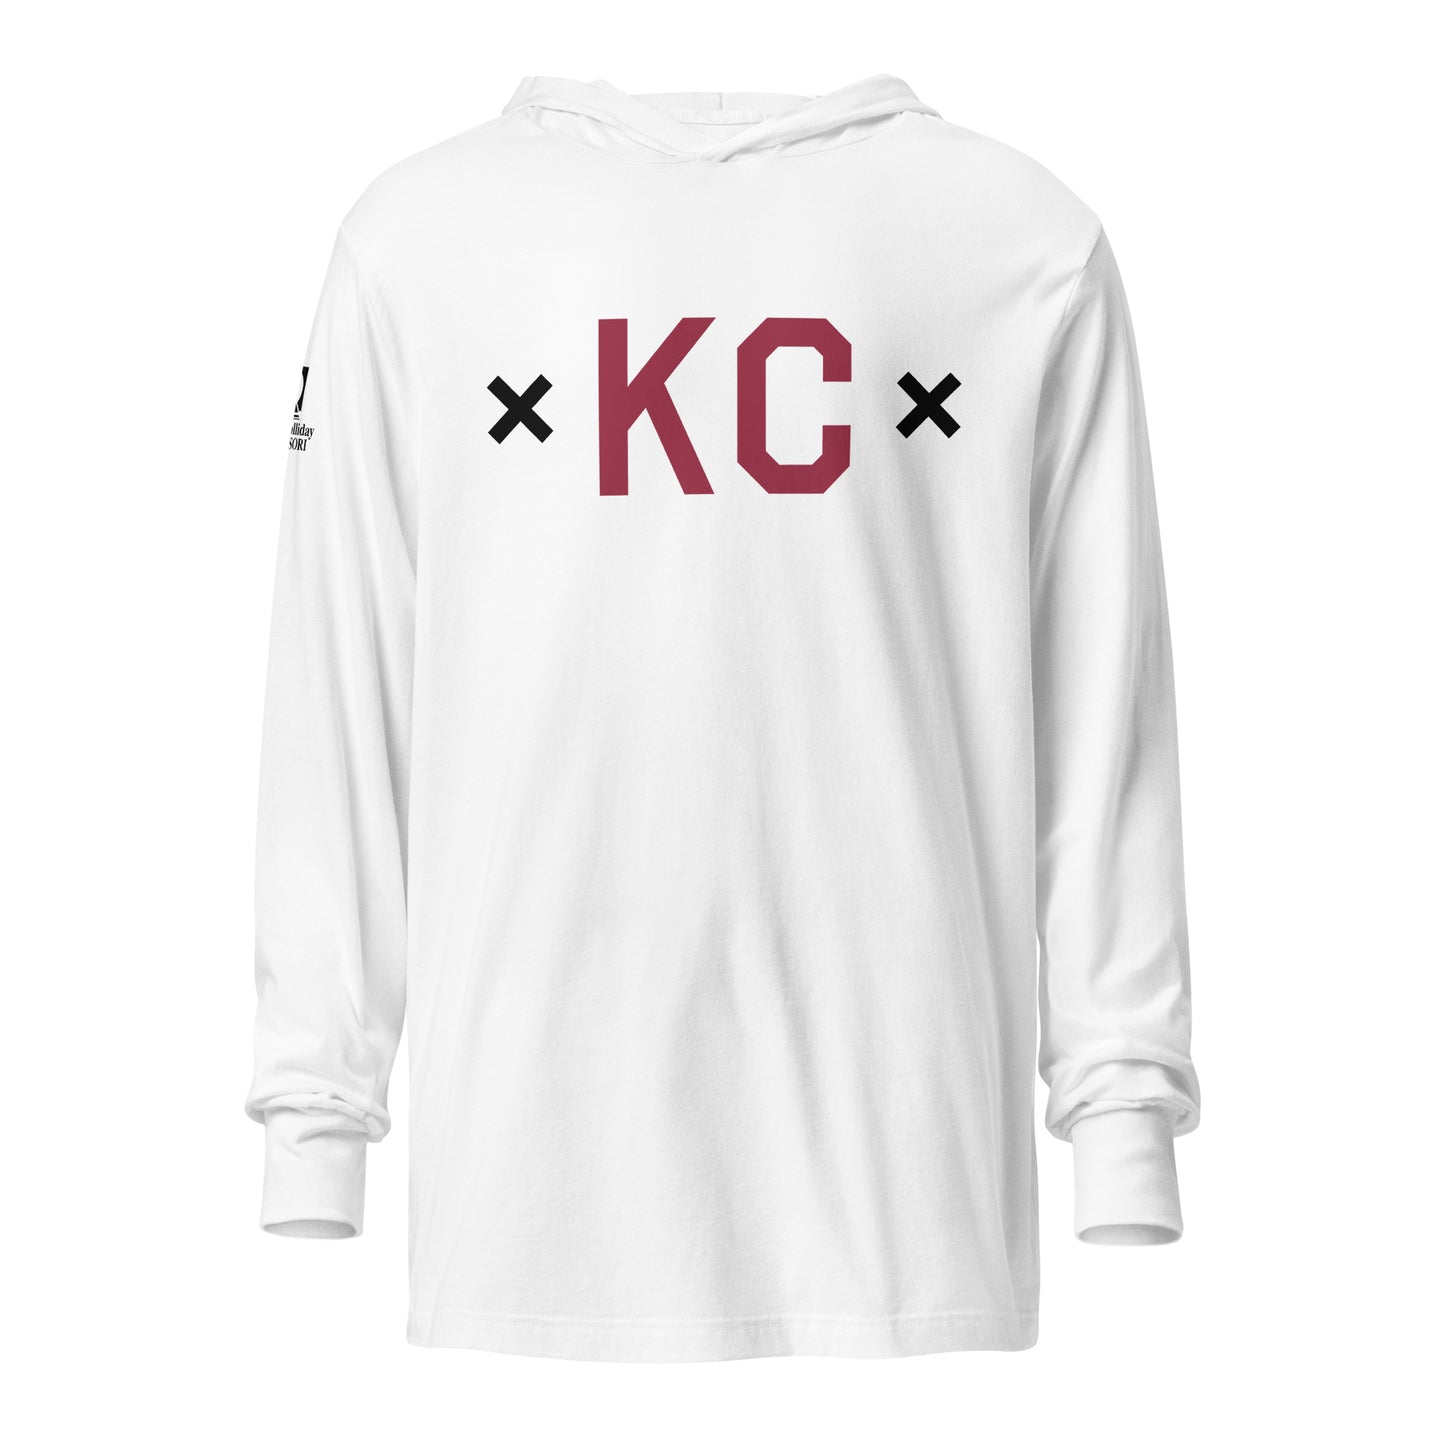 Signature KC Adult Hooded T-Shirt - Holliday X MADE MOBB